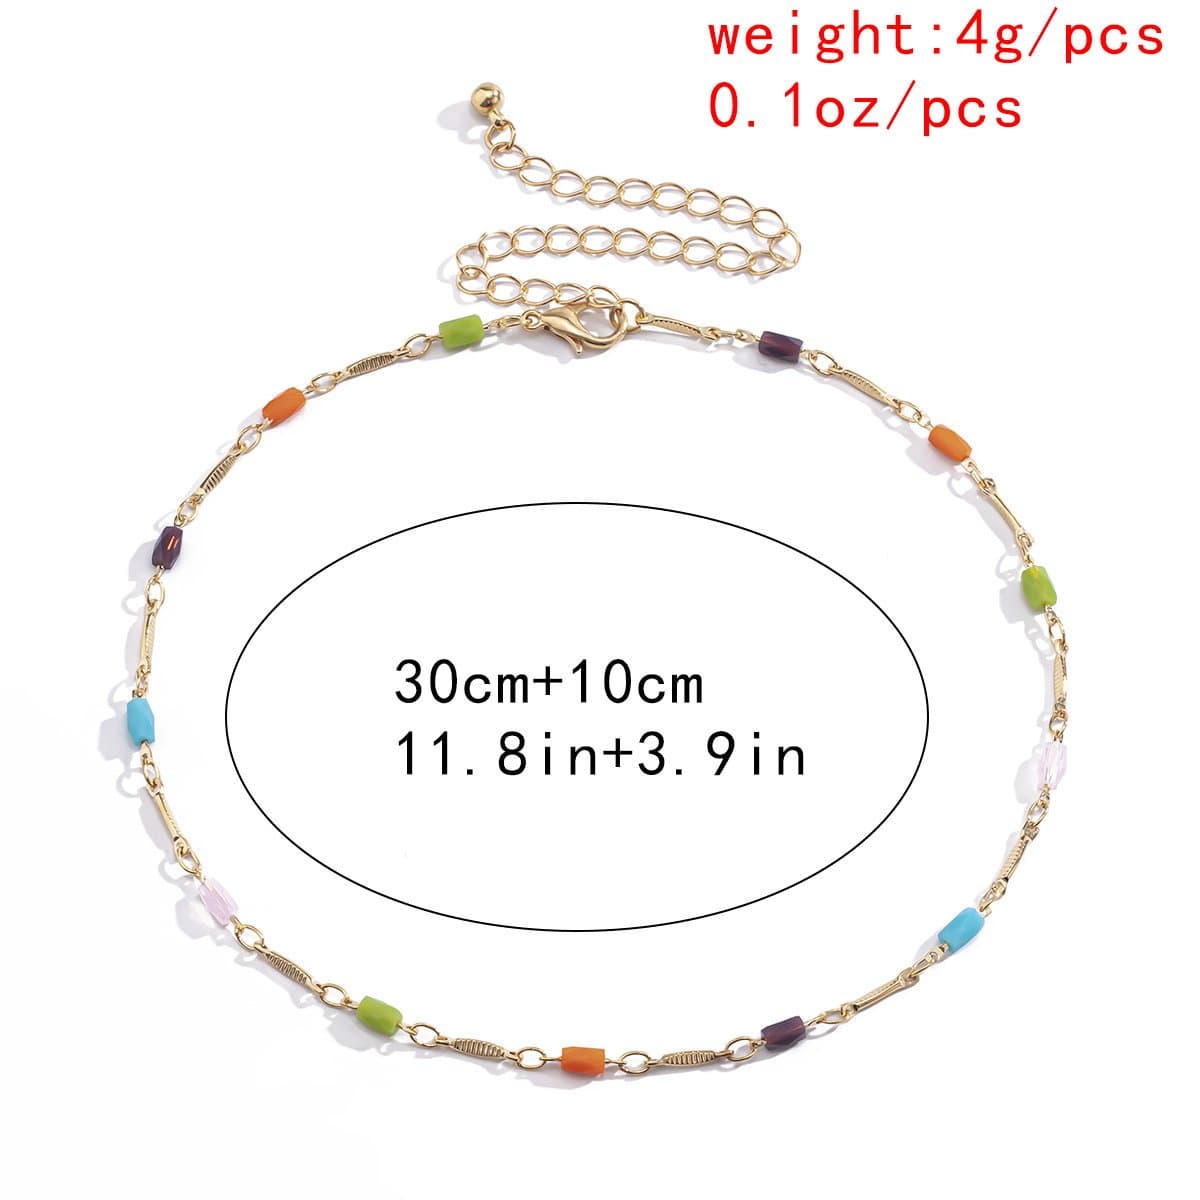 Trendy Colorful Acrylic Cylindricity Charm Choker Necklace